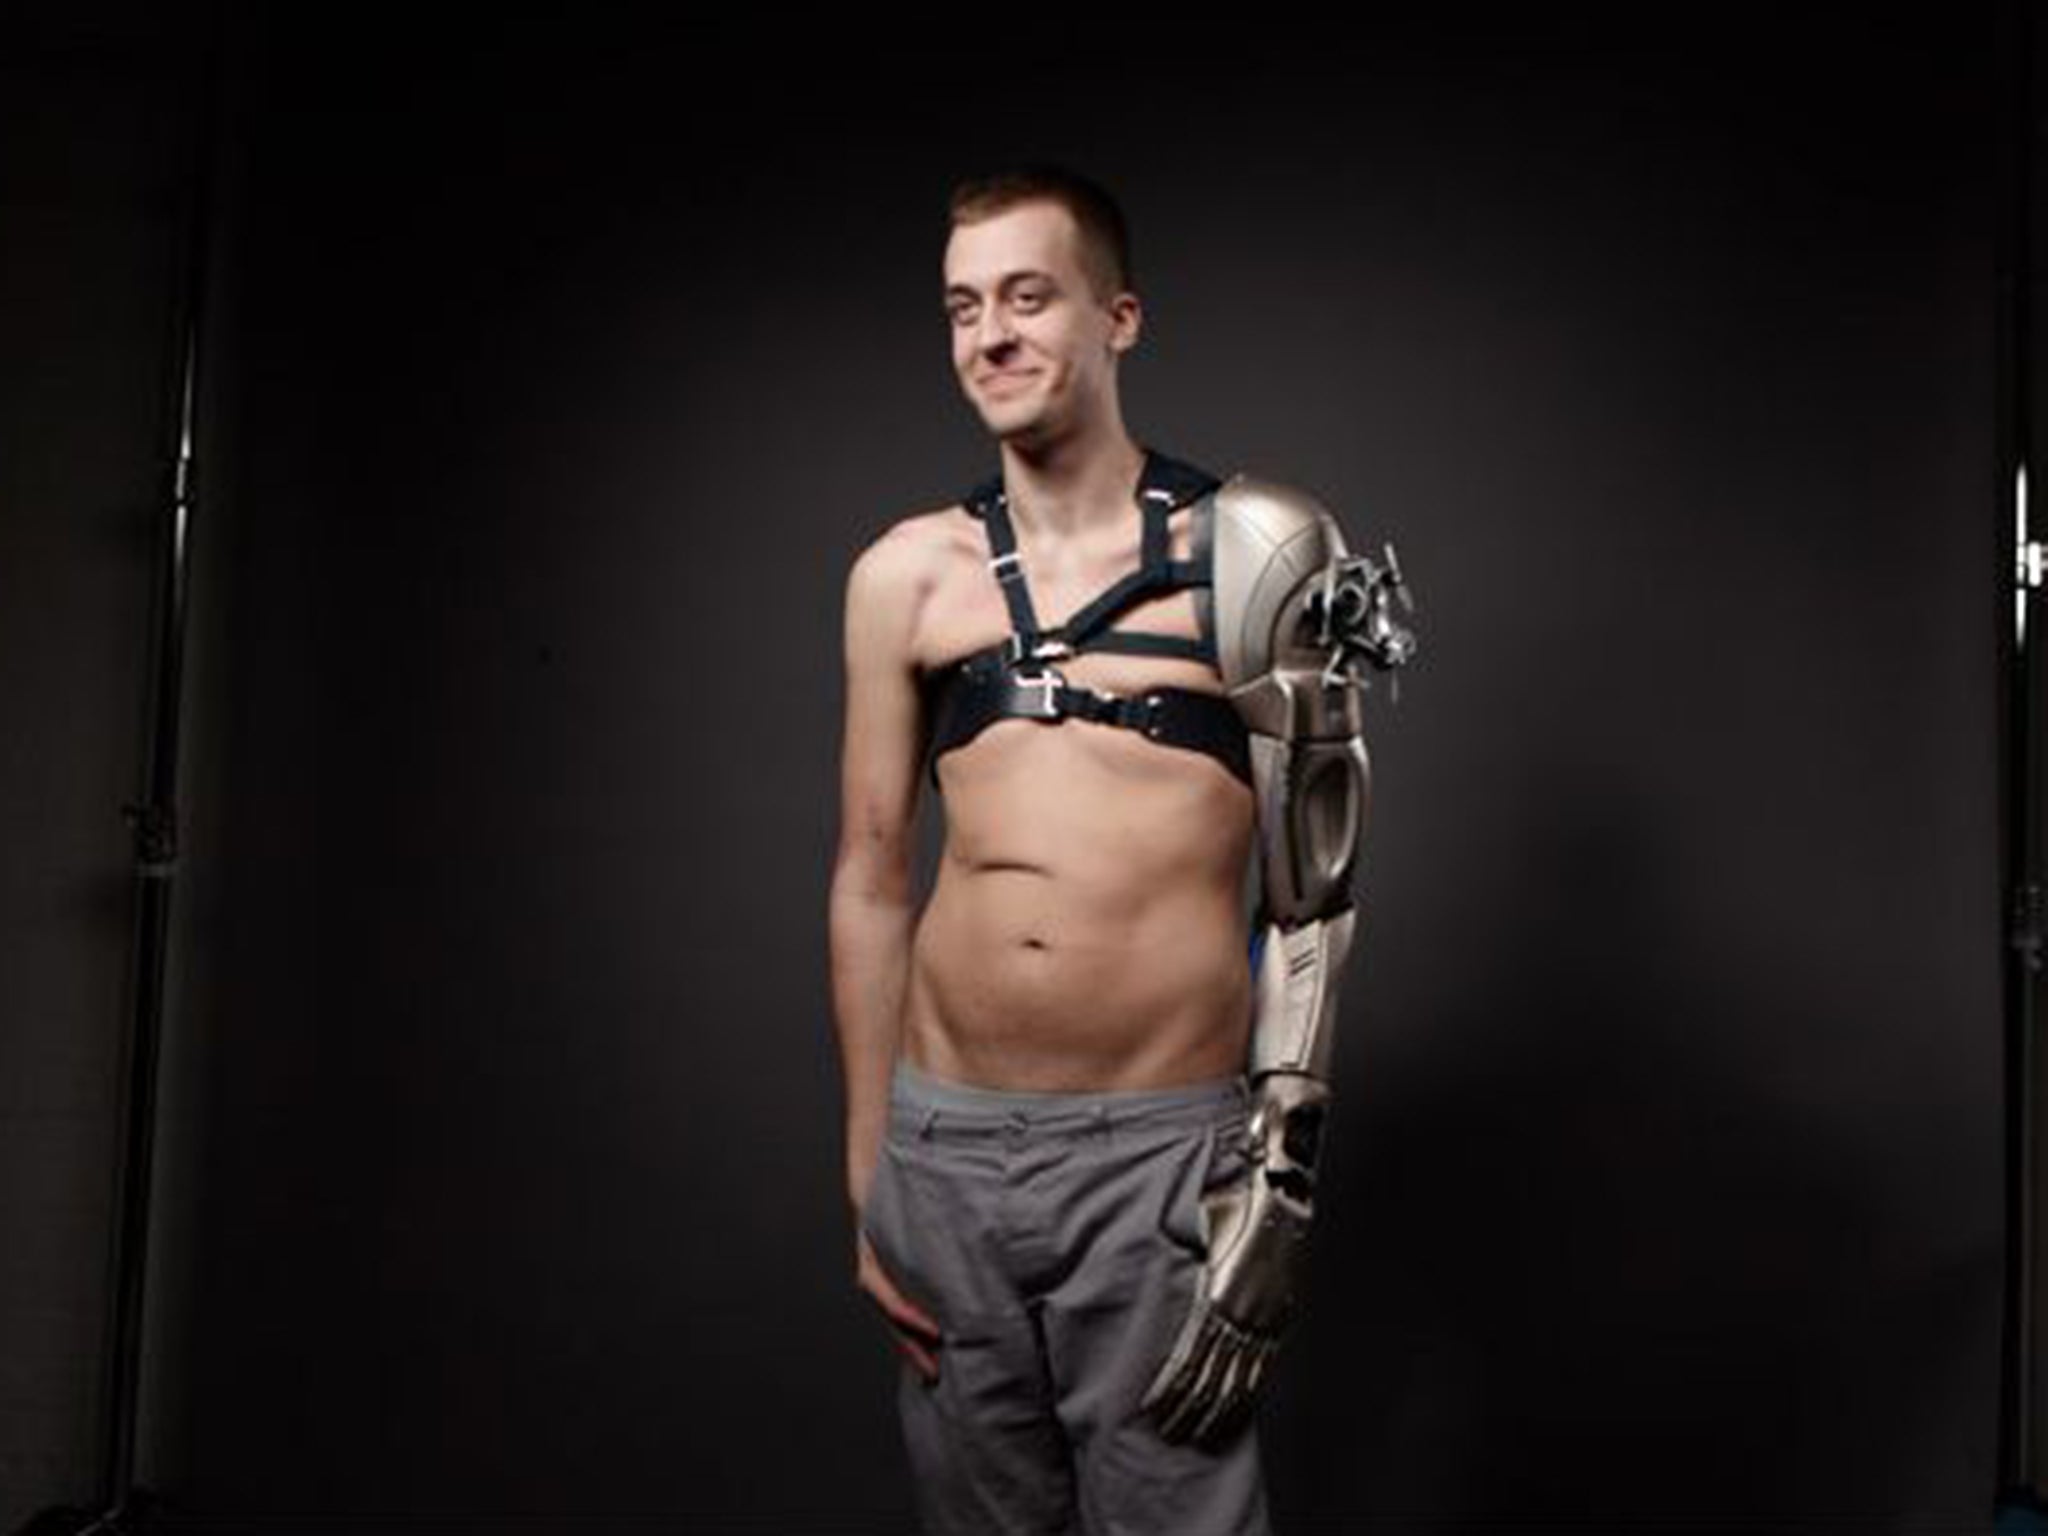 James Young’s new arm was designed and built by a 10-strong team, led by prosthetic sculptor Sophie de Oliveira Barata